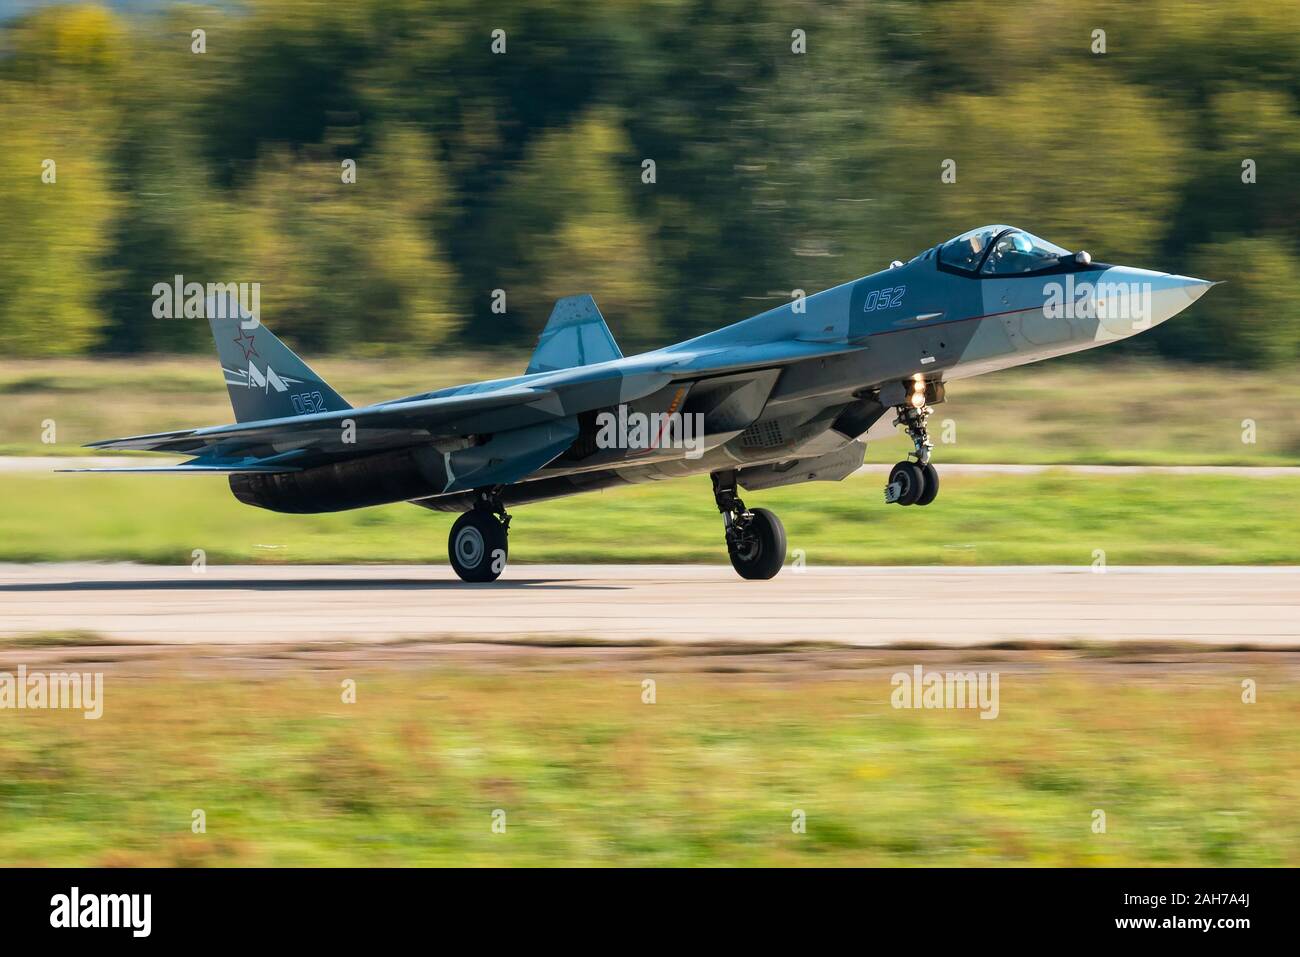 The Sukhoi Su-57 stealth fighter jet of the Russian Air Force at the MAKS 2019 airshow. Stock Photo